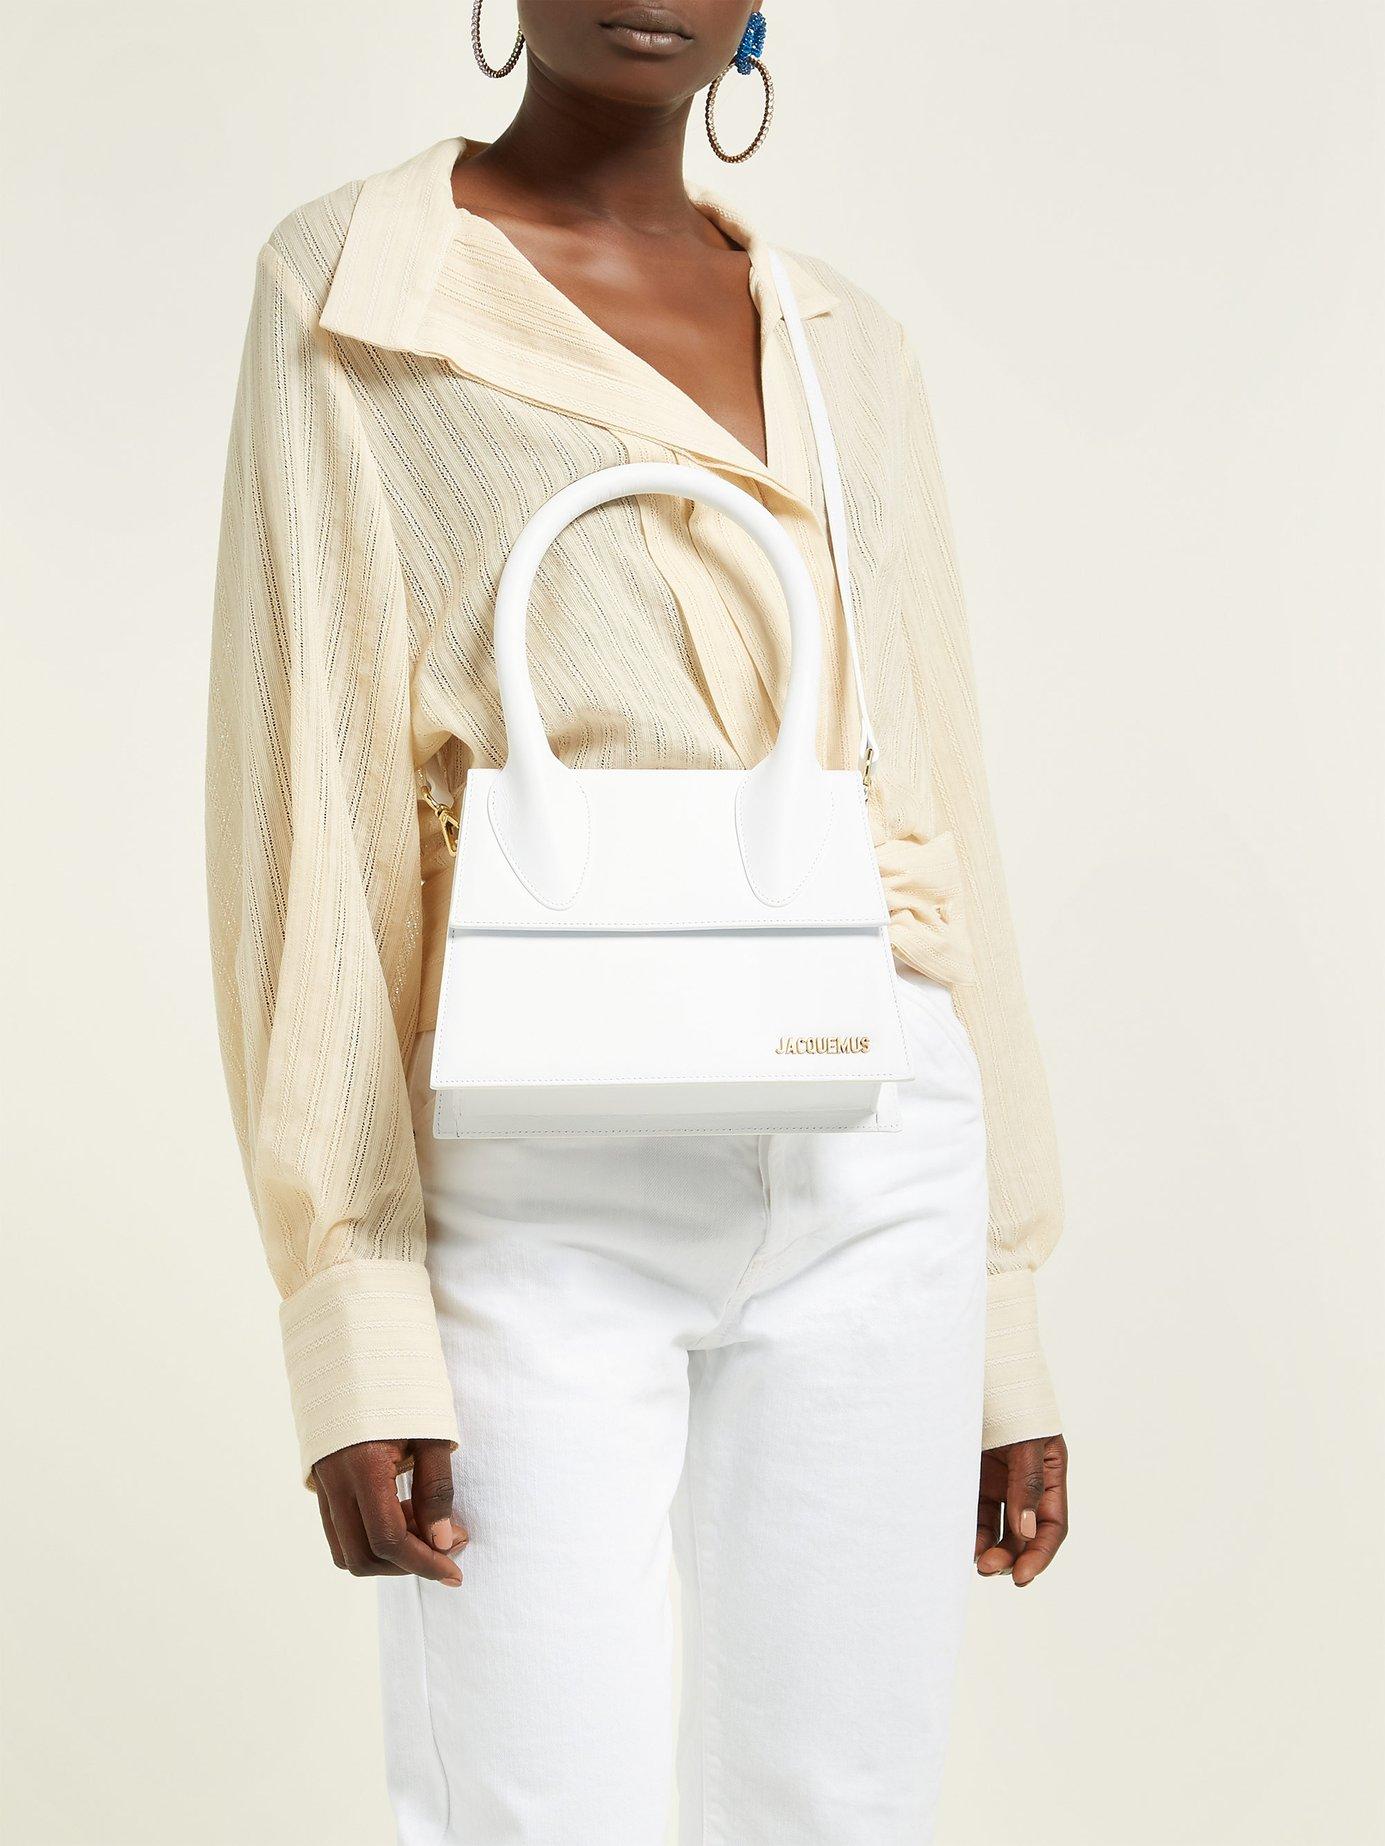 Jacquemus Le Grand Chiquito Bag in White | Lyst